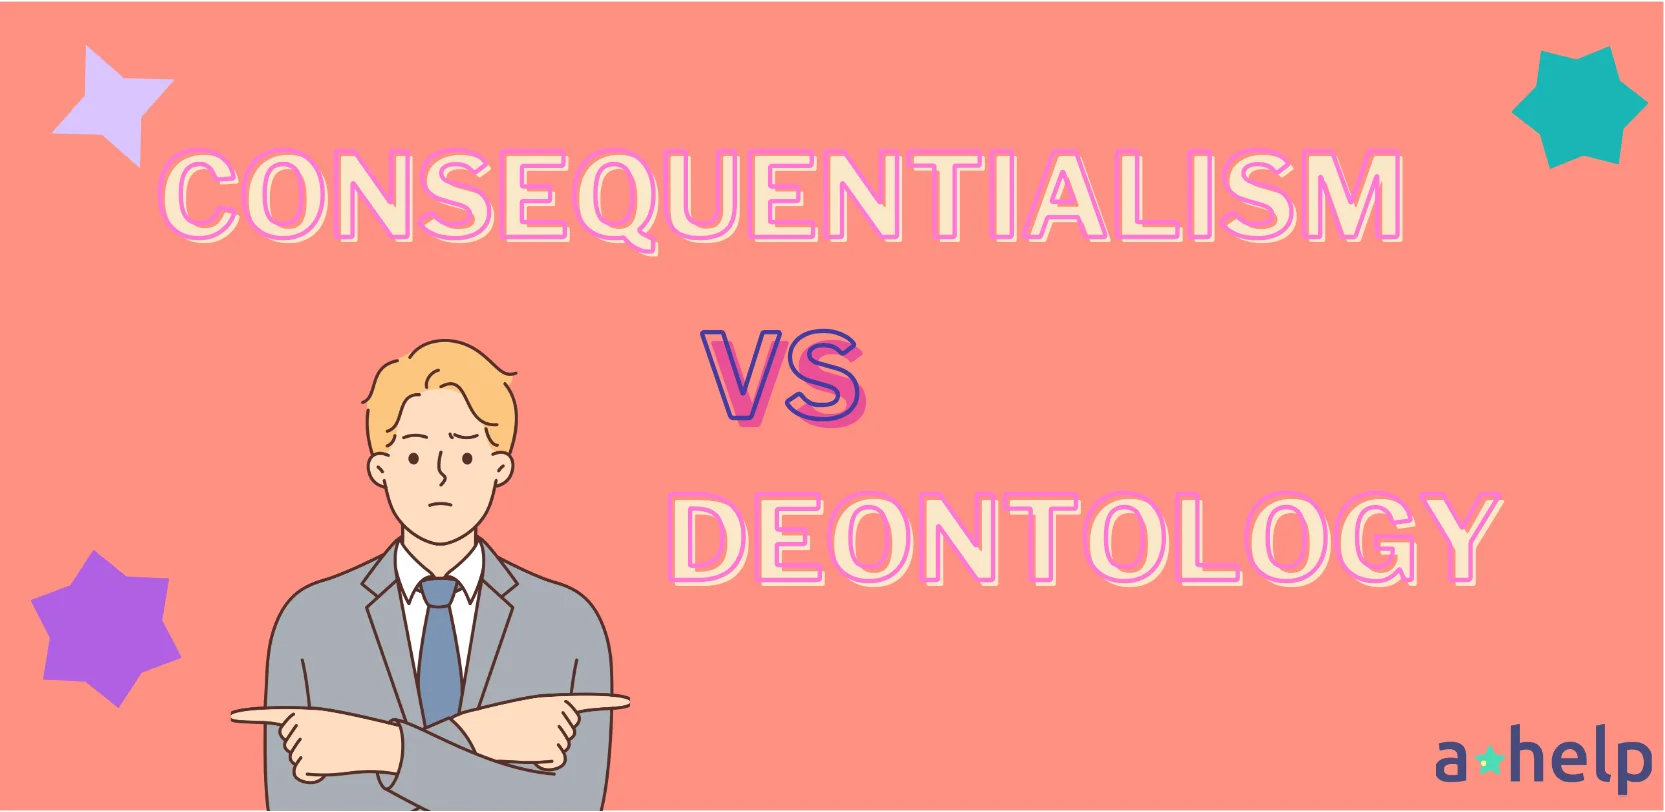 Consequentialism vs Deontology